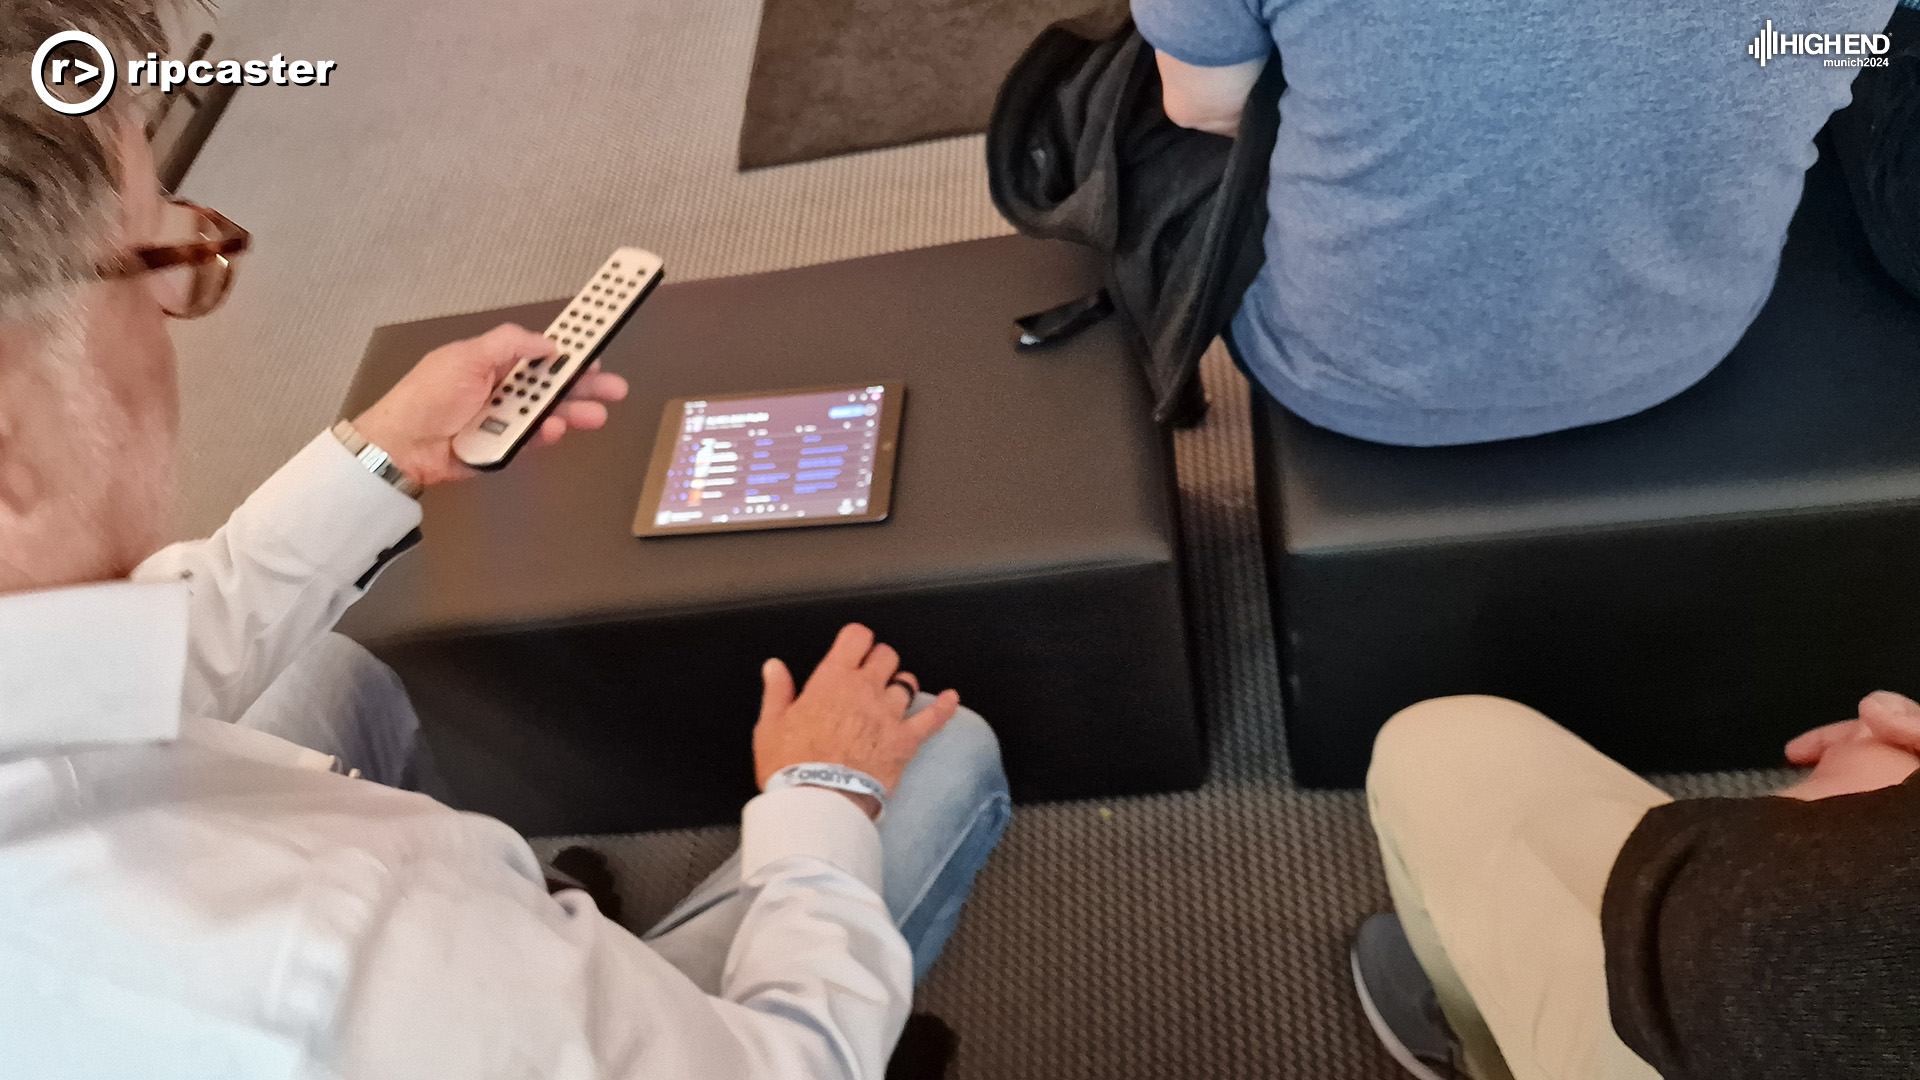 A person holding a remote control with an iPad on a seat in front of him.